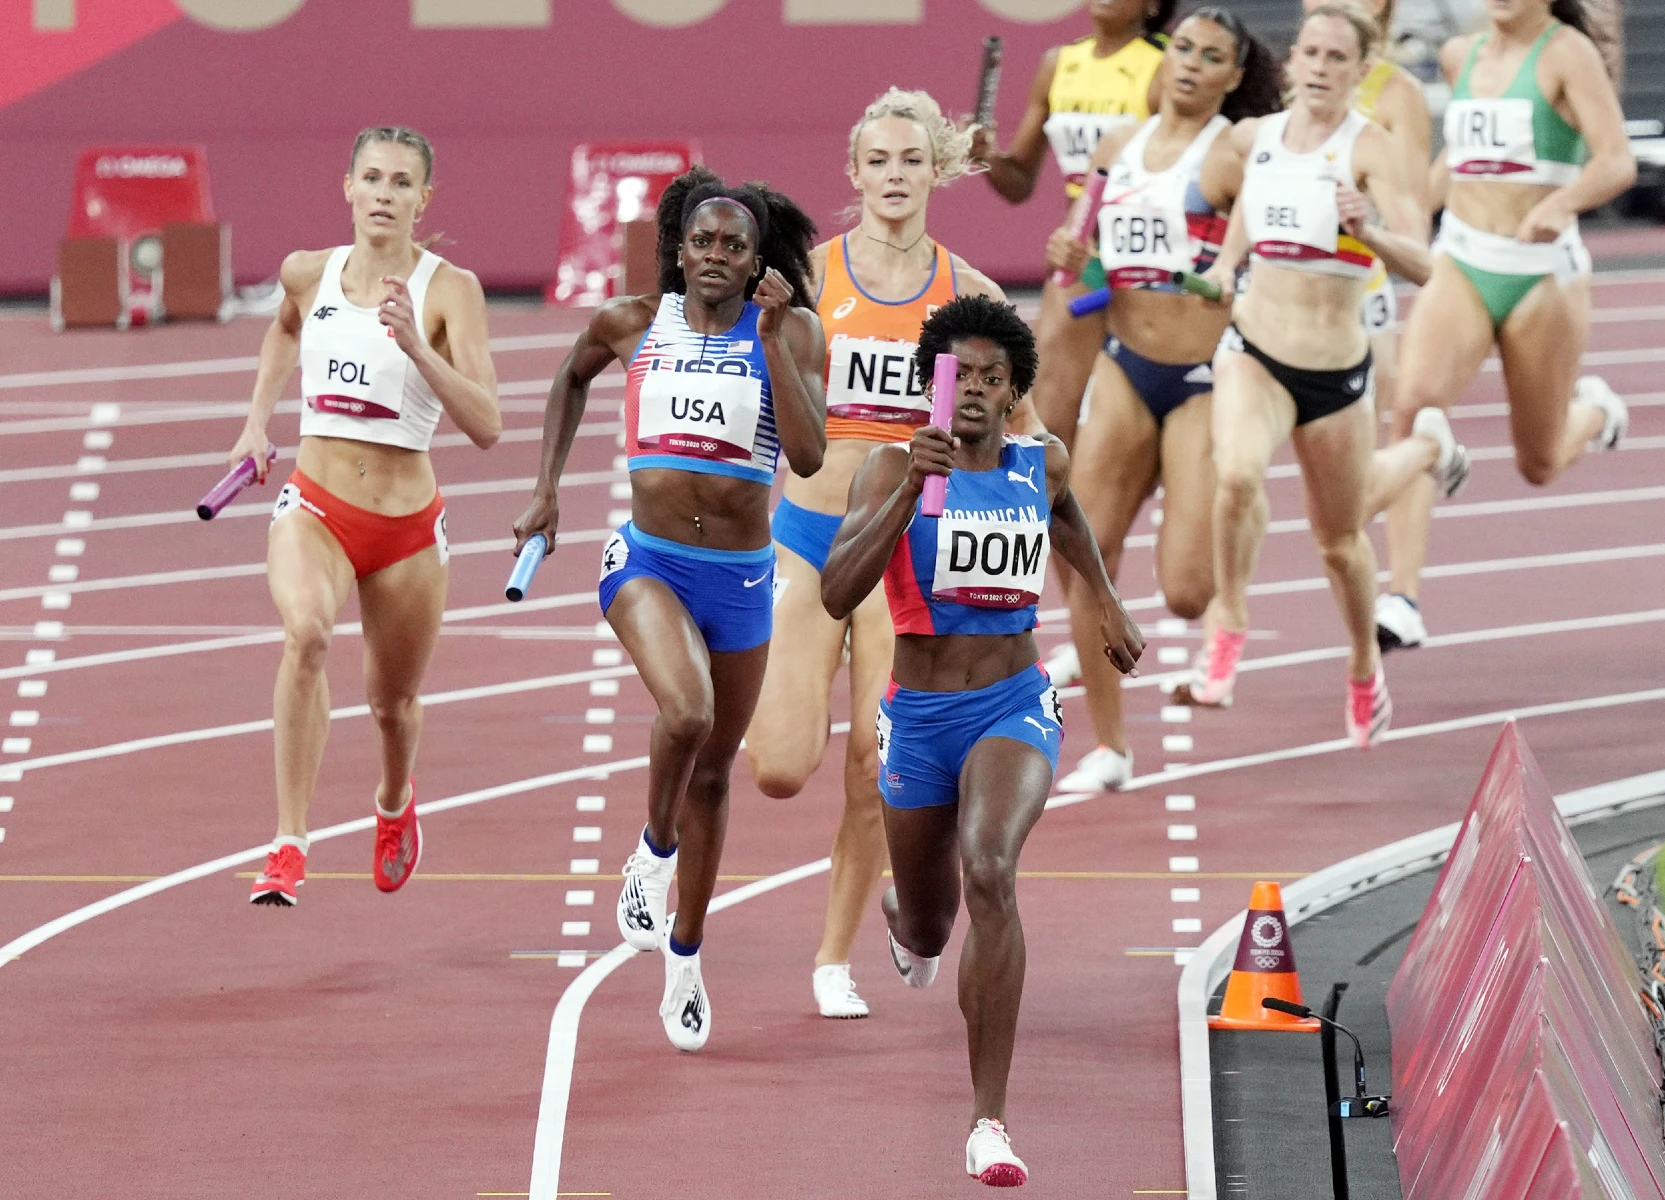 4x400 Mixed Relays at the Tokyo Olympics 2022